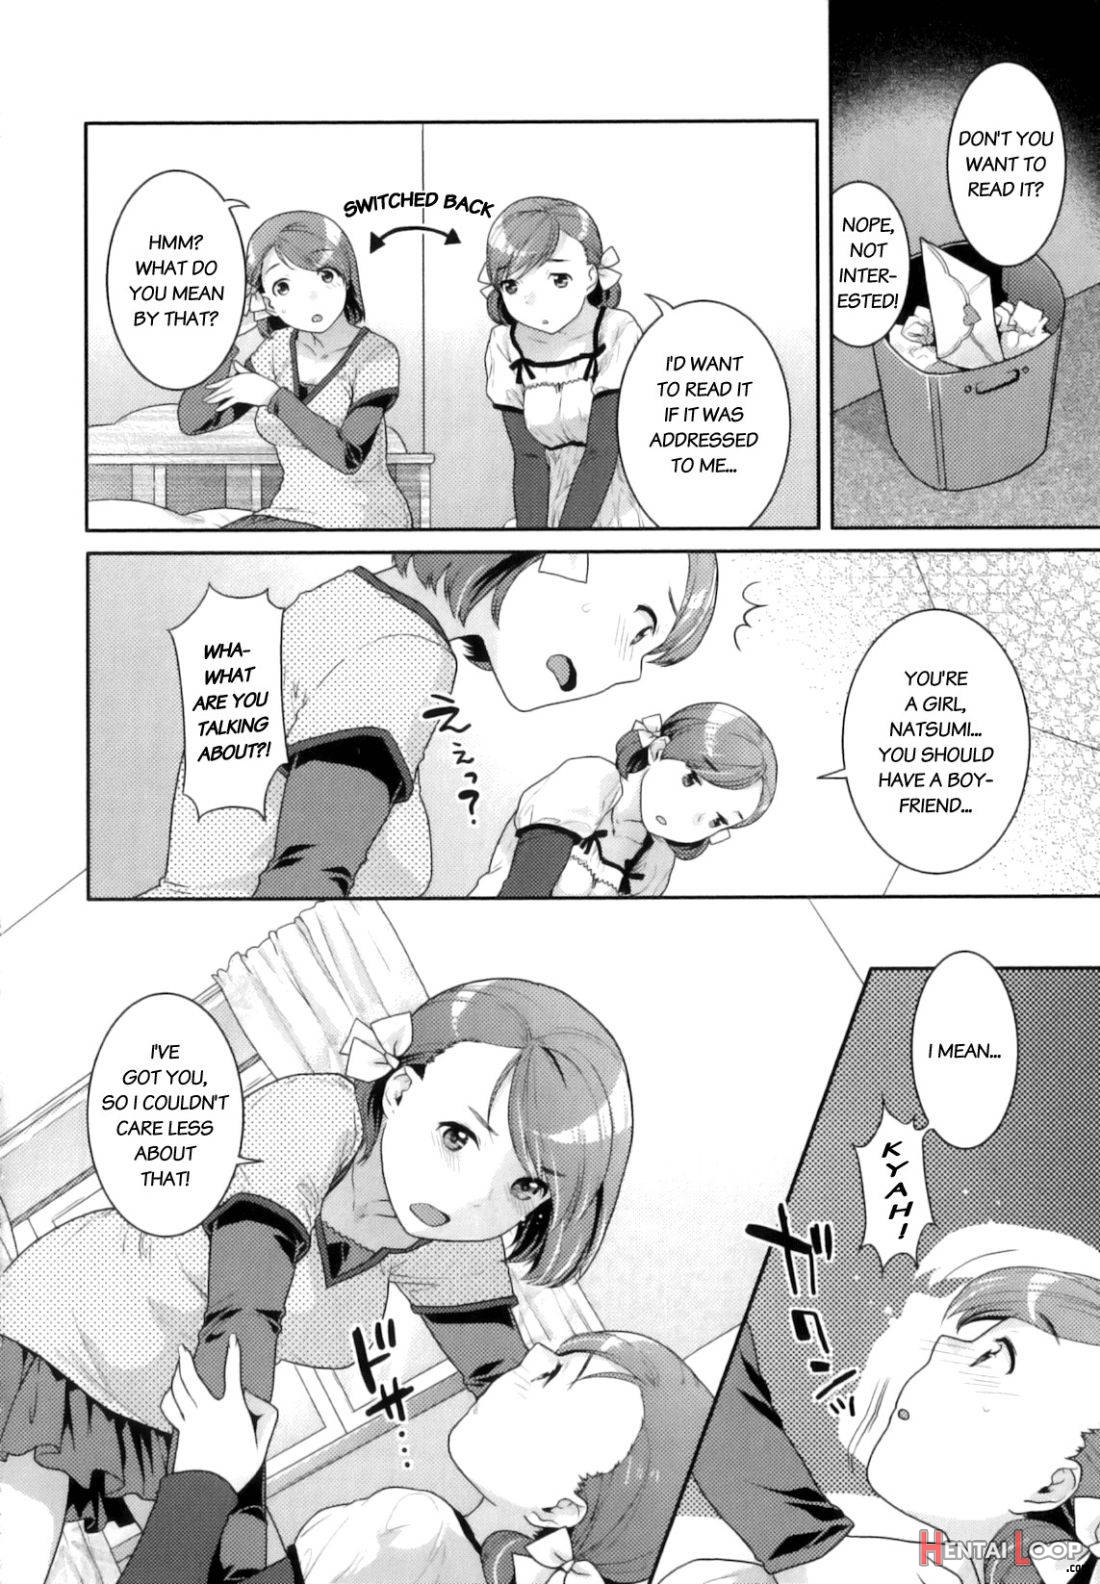 Twinkle Lovers page 6